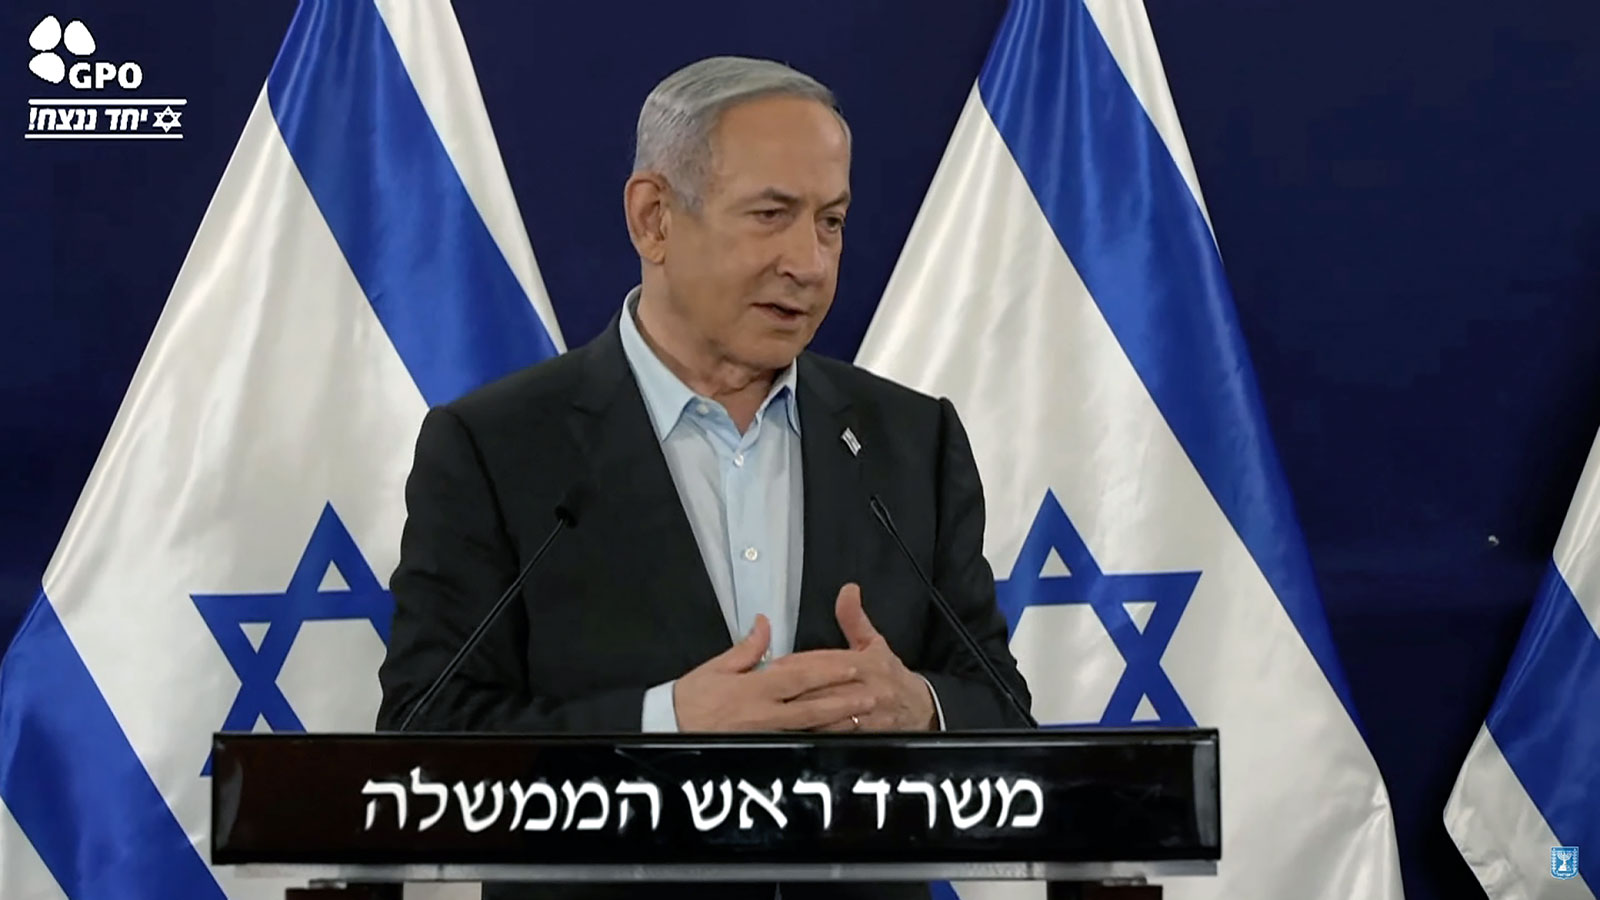 Netanyahu speaks during a press conference on Tuesday, December 5.